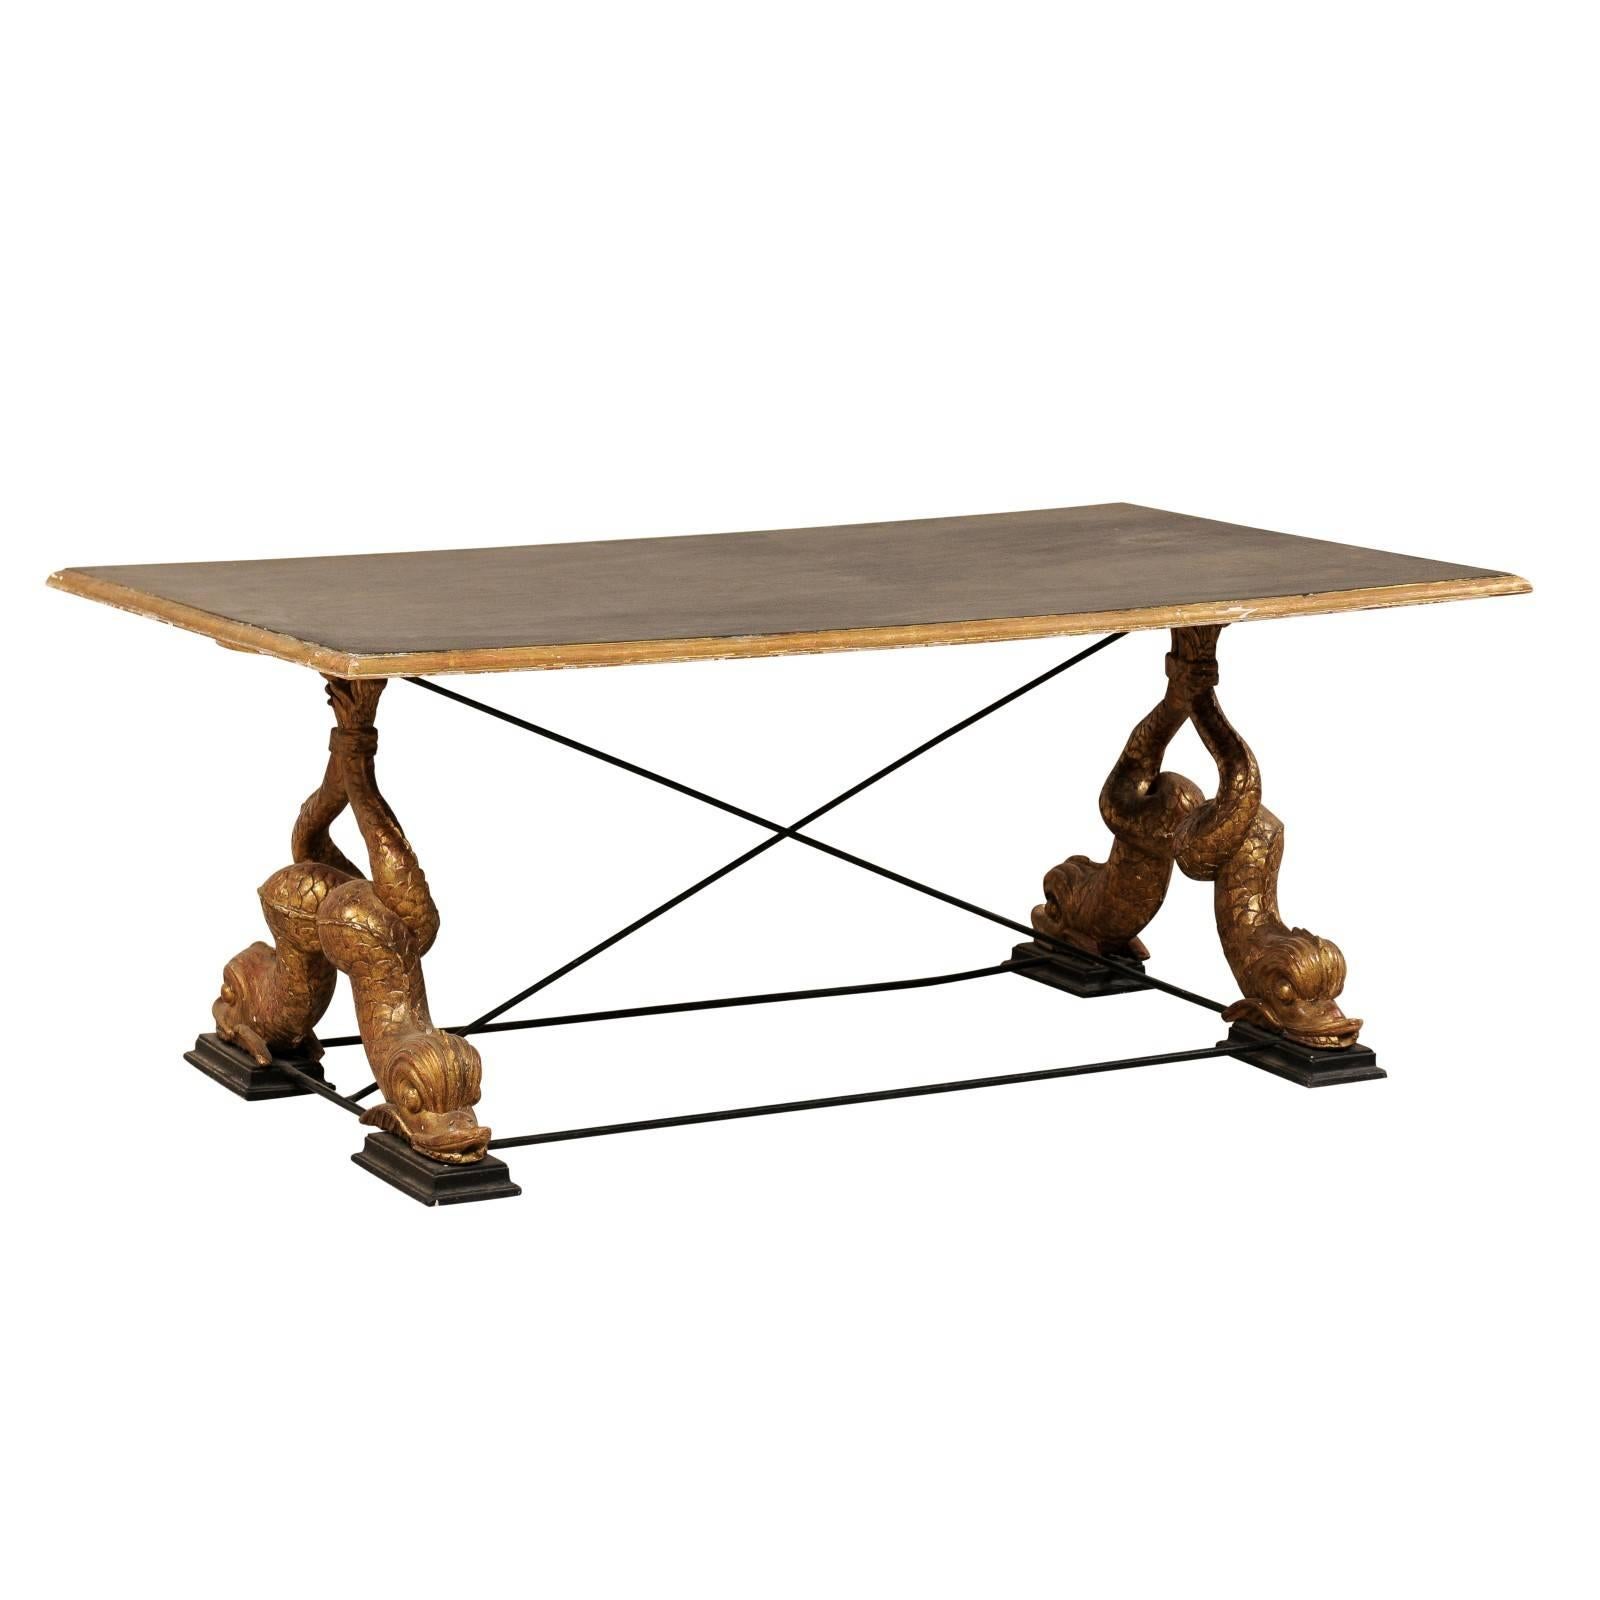 Italian Mid-Century Coffee Table with Carved Mythological Creature Fish Legs